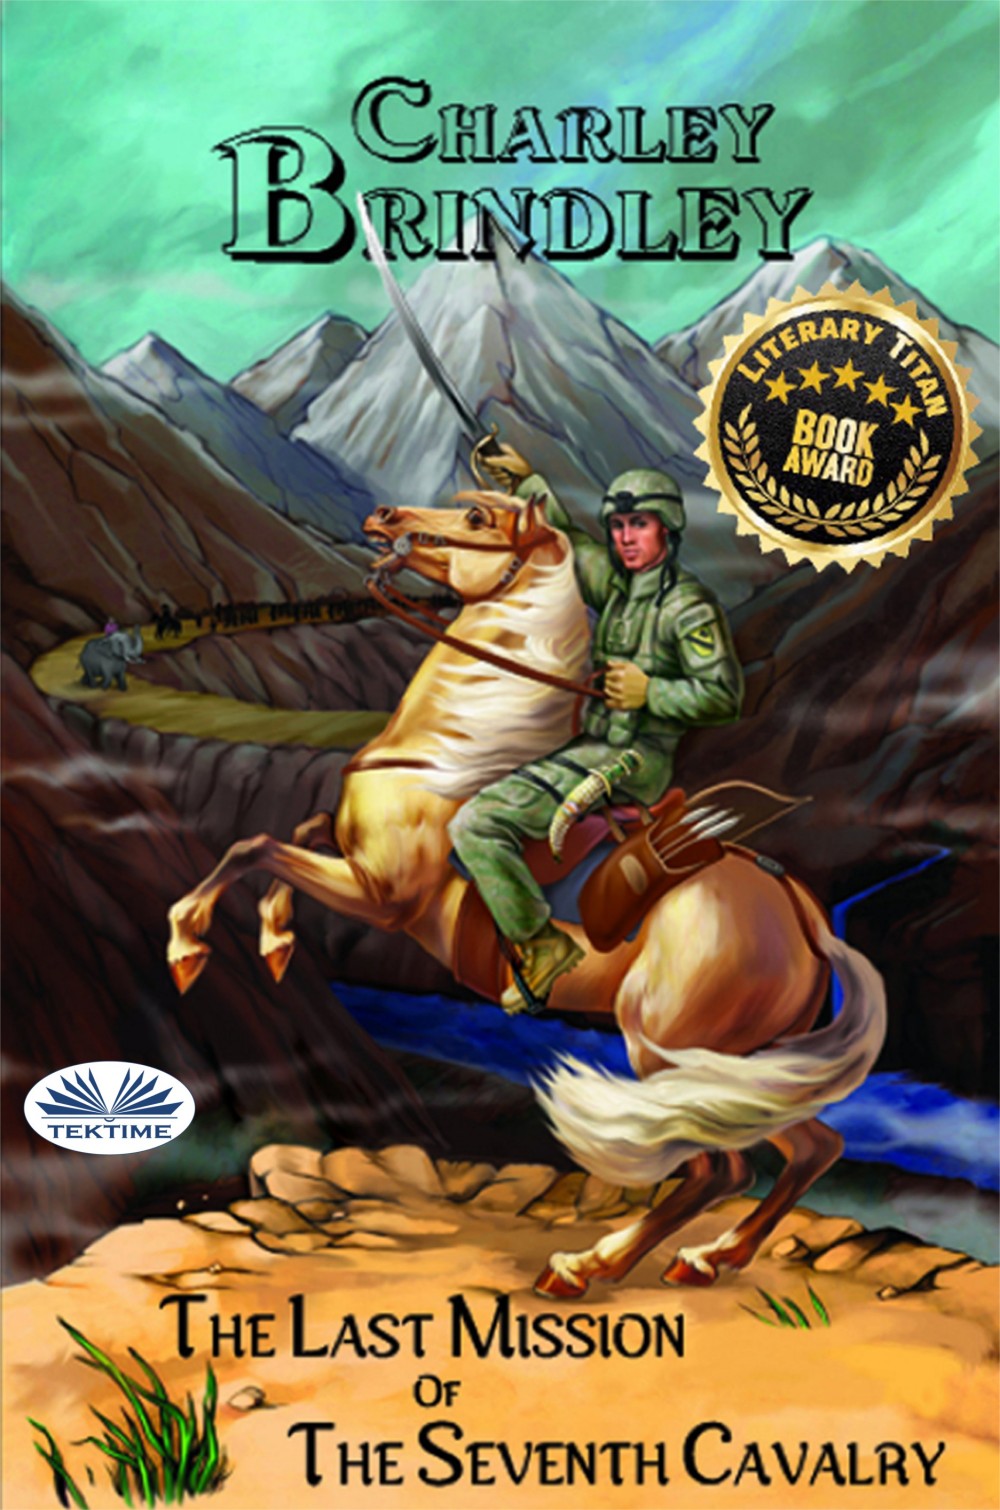 The Last Mission of the Seventh Cavalry